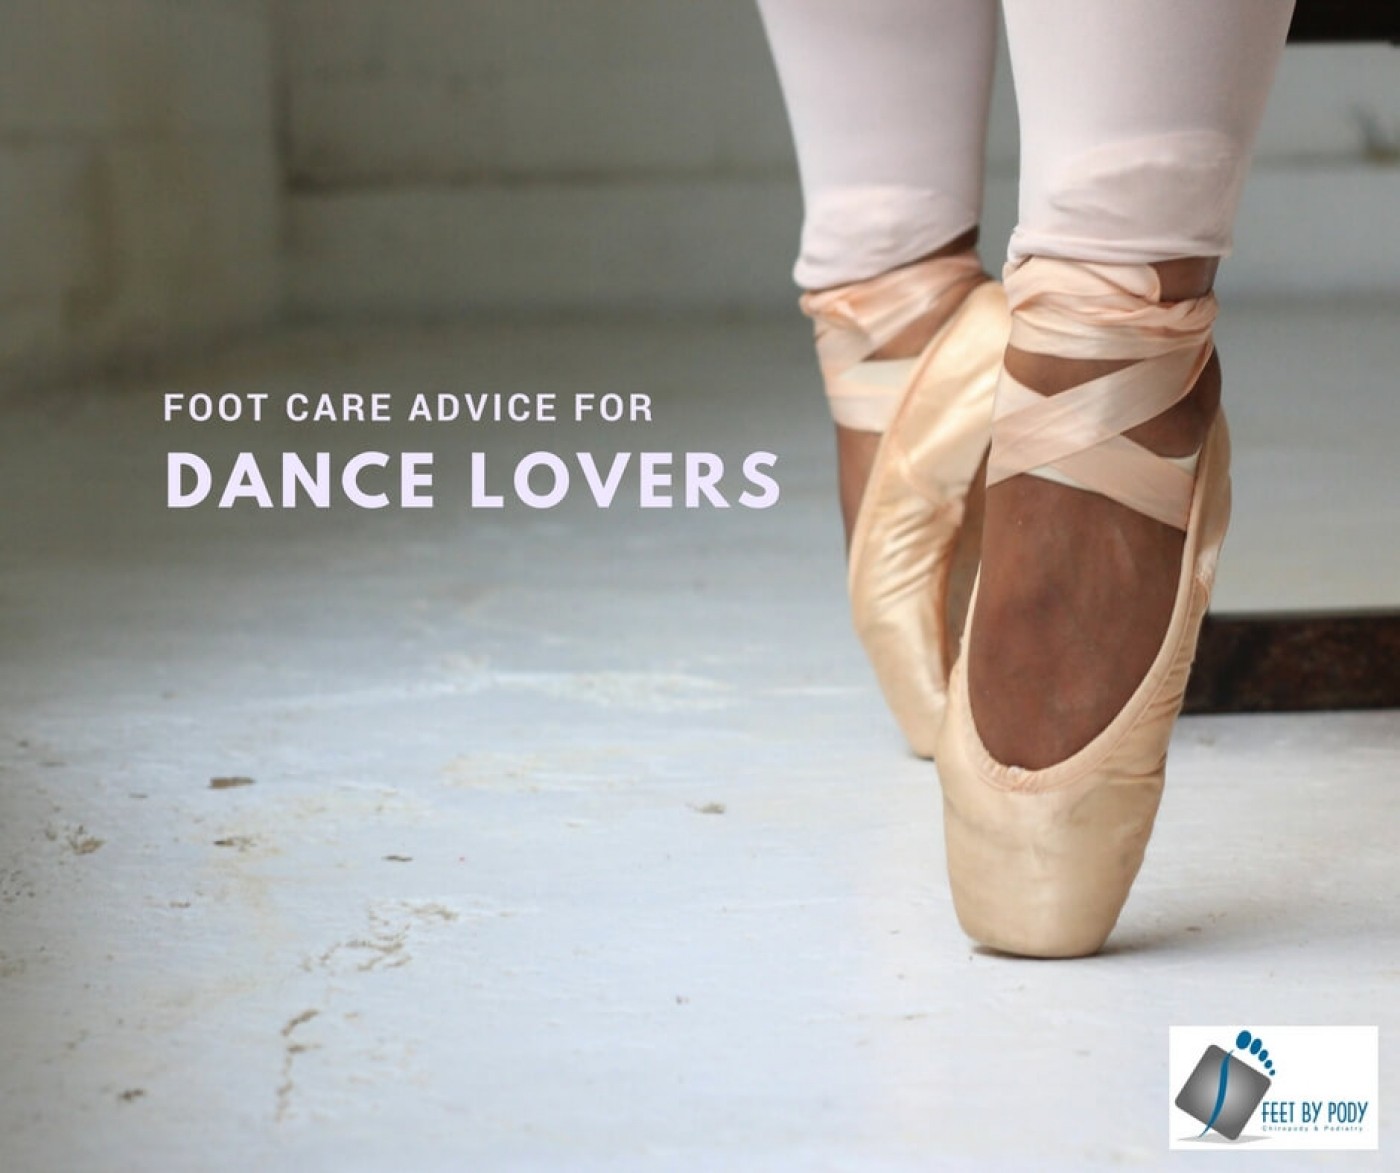 How Ballet Can Damage Your Feet – Cleveland Clinic